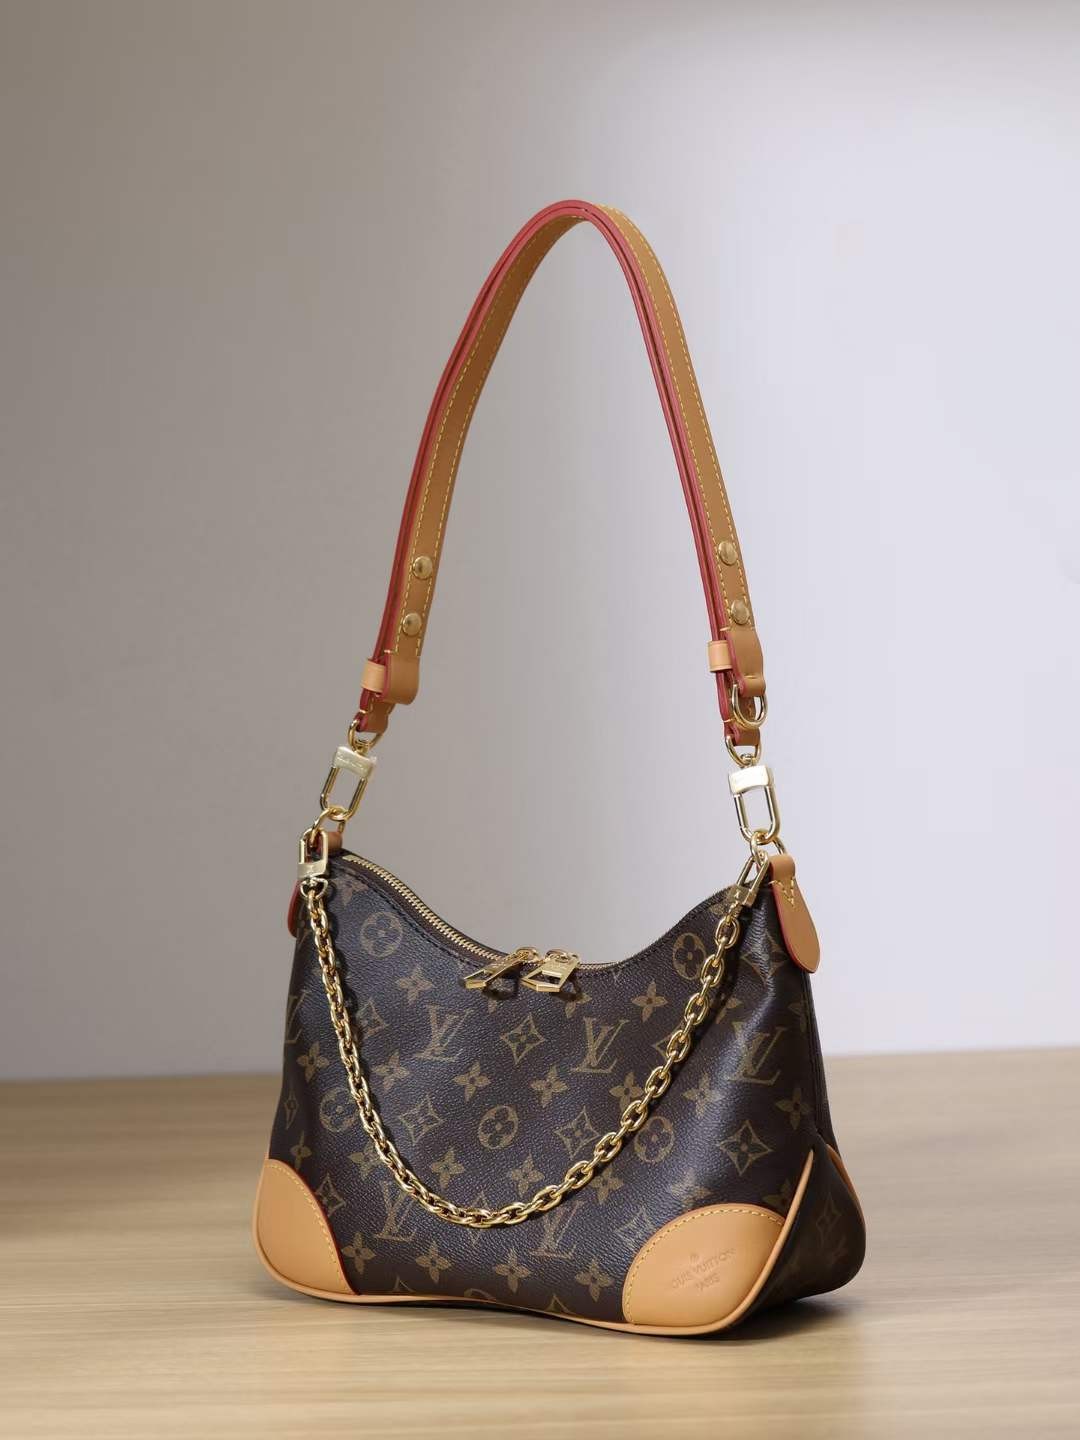 Louis Vuitton M45832 Boulogne Top Replica Handbag Overall Appearance (2022 Latest)-Best Quality Fake Louis Vuitton Bag Online Store, Replica designer bag ru